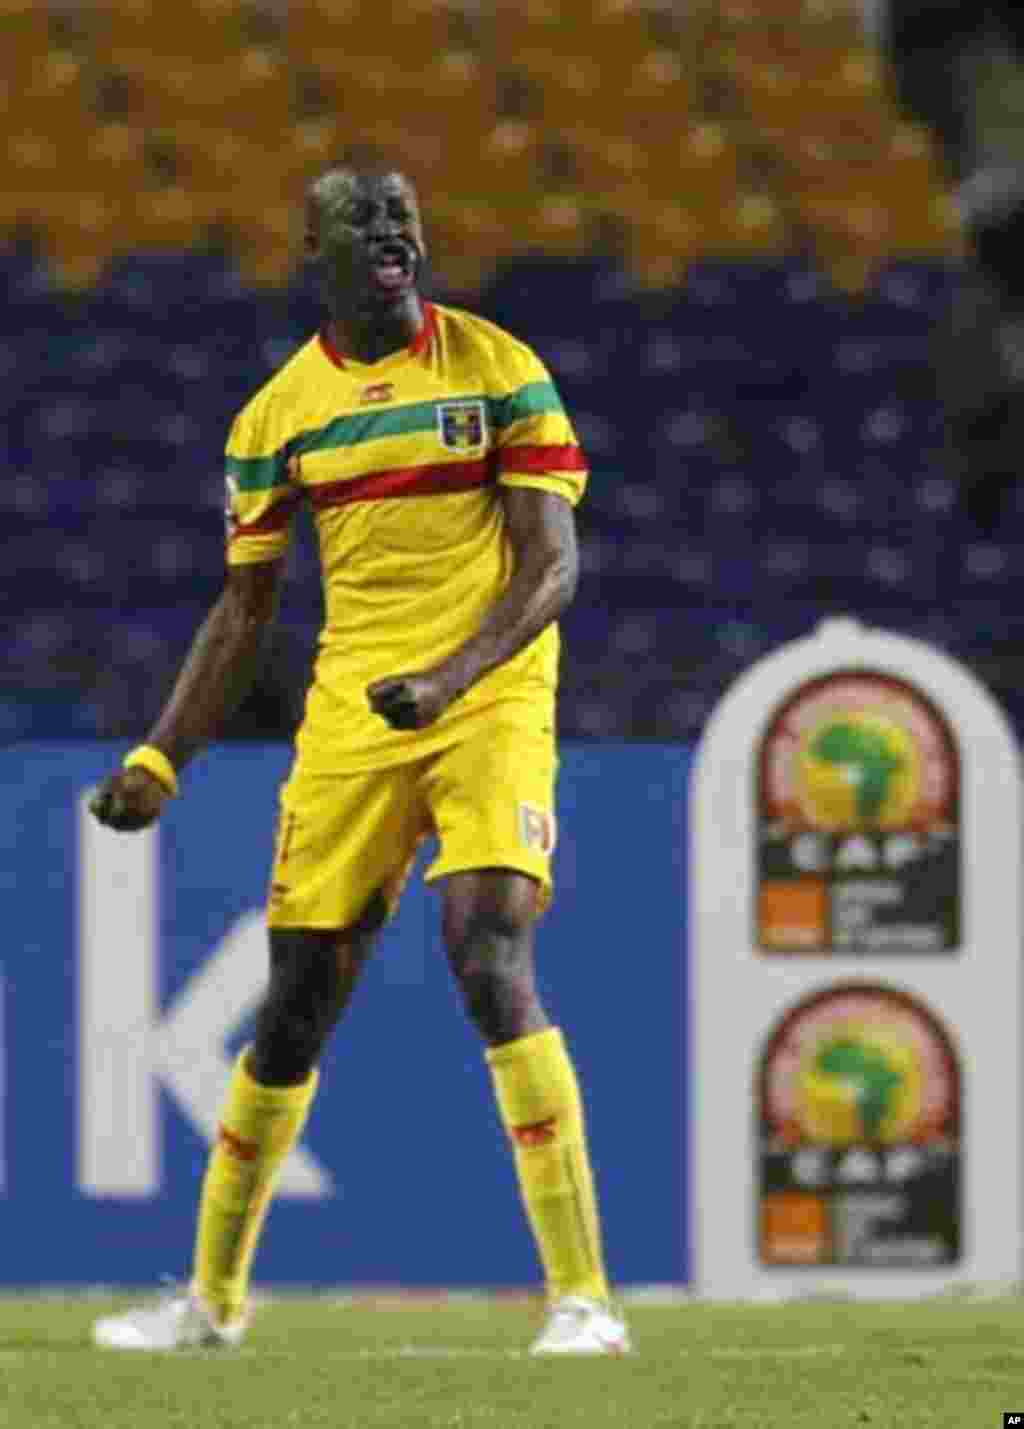 Mali's Garra Dembele celebrates his goal against Botswana during their final African Cup of Nations Group D soccer match at the Stade De L'Amitie Stadium in Libreville February 1, 2012.